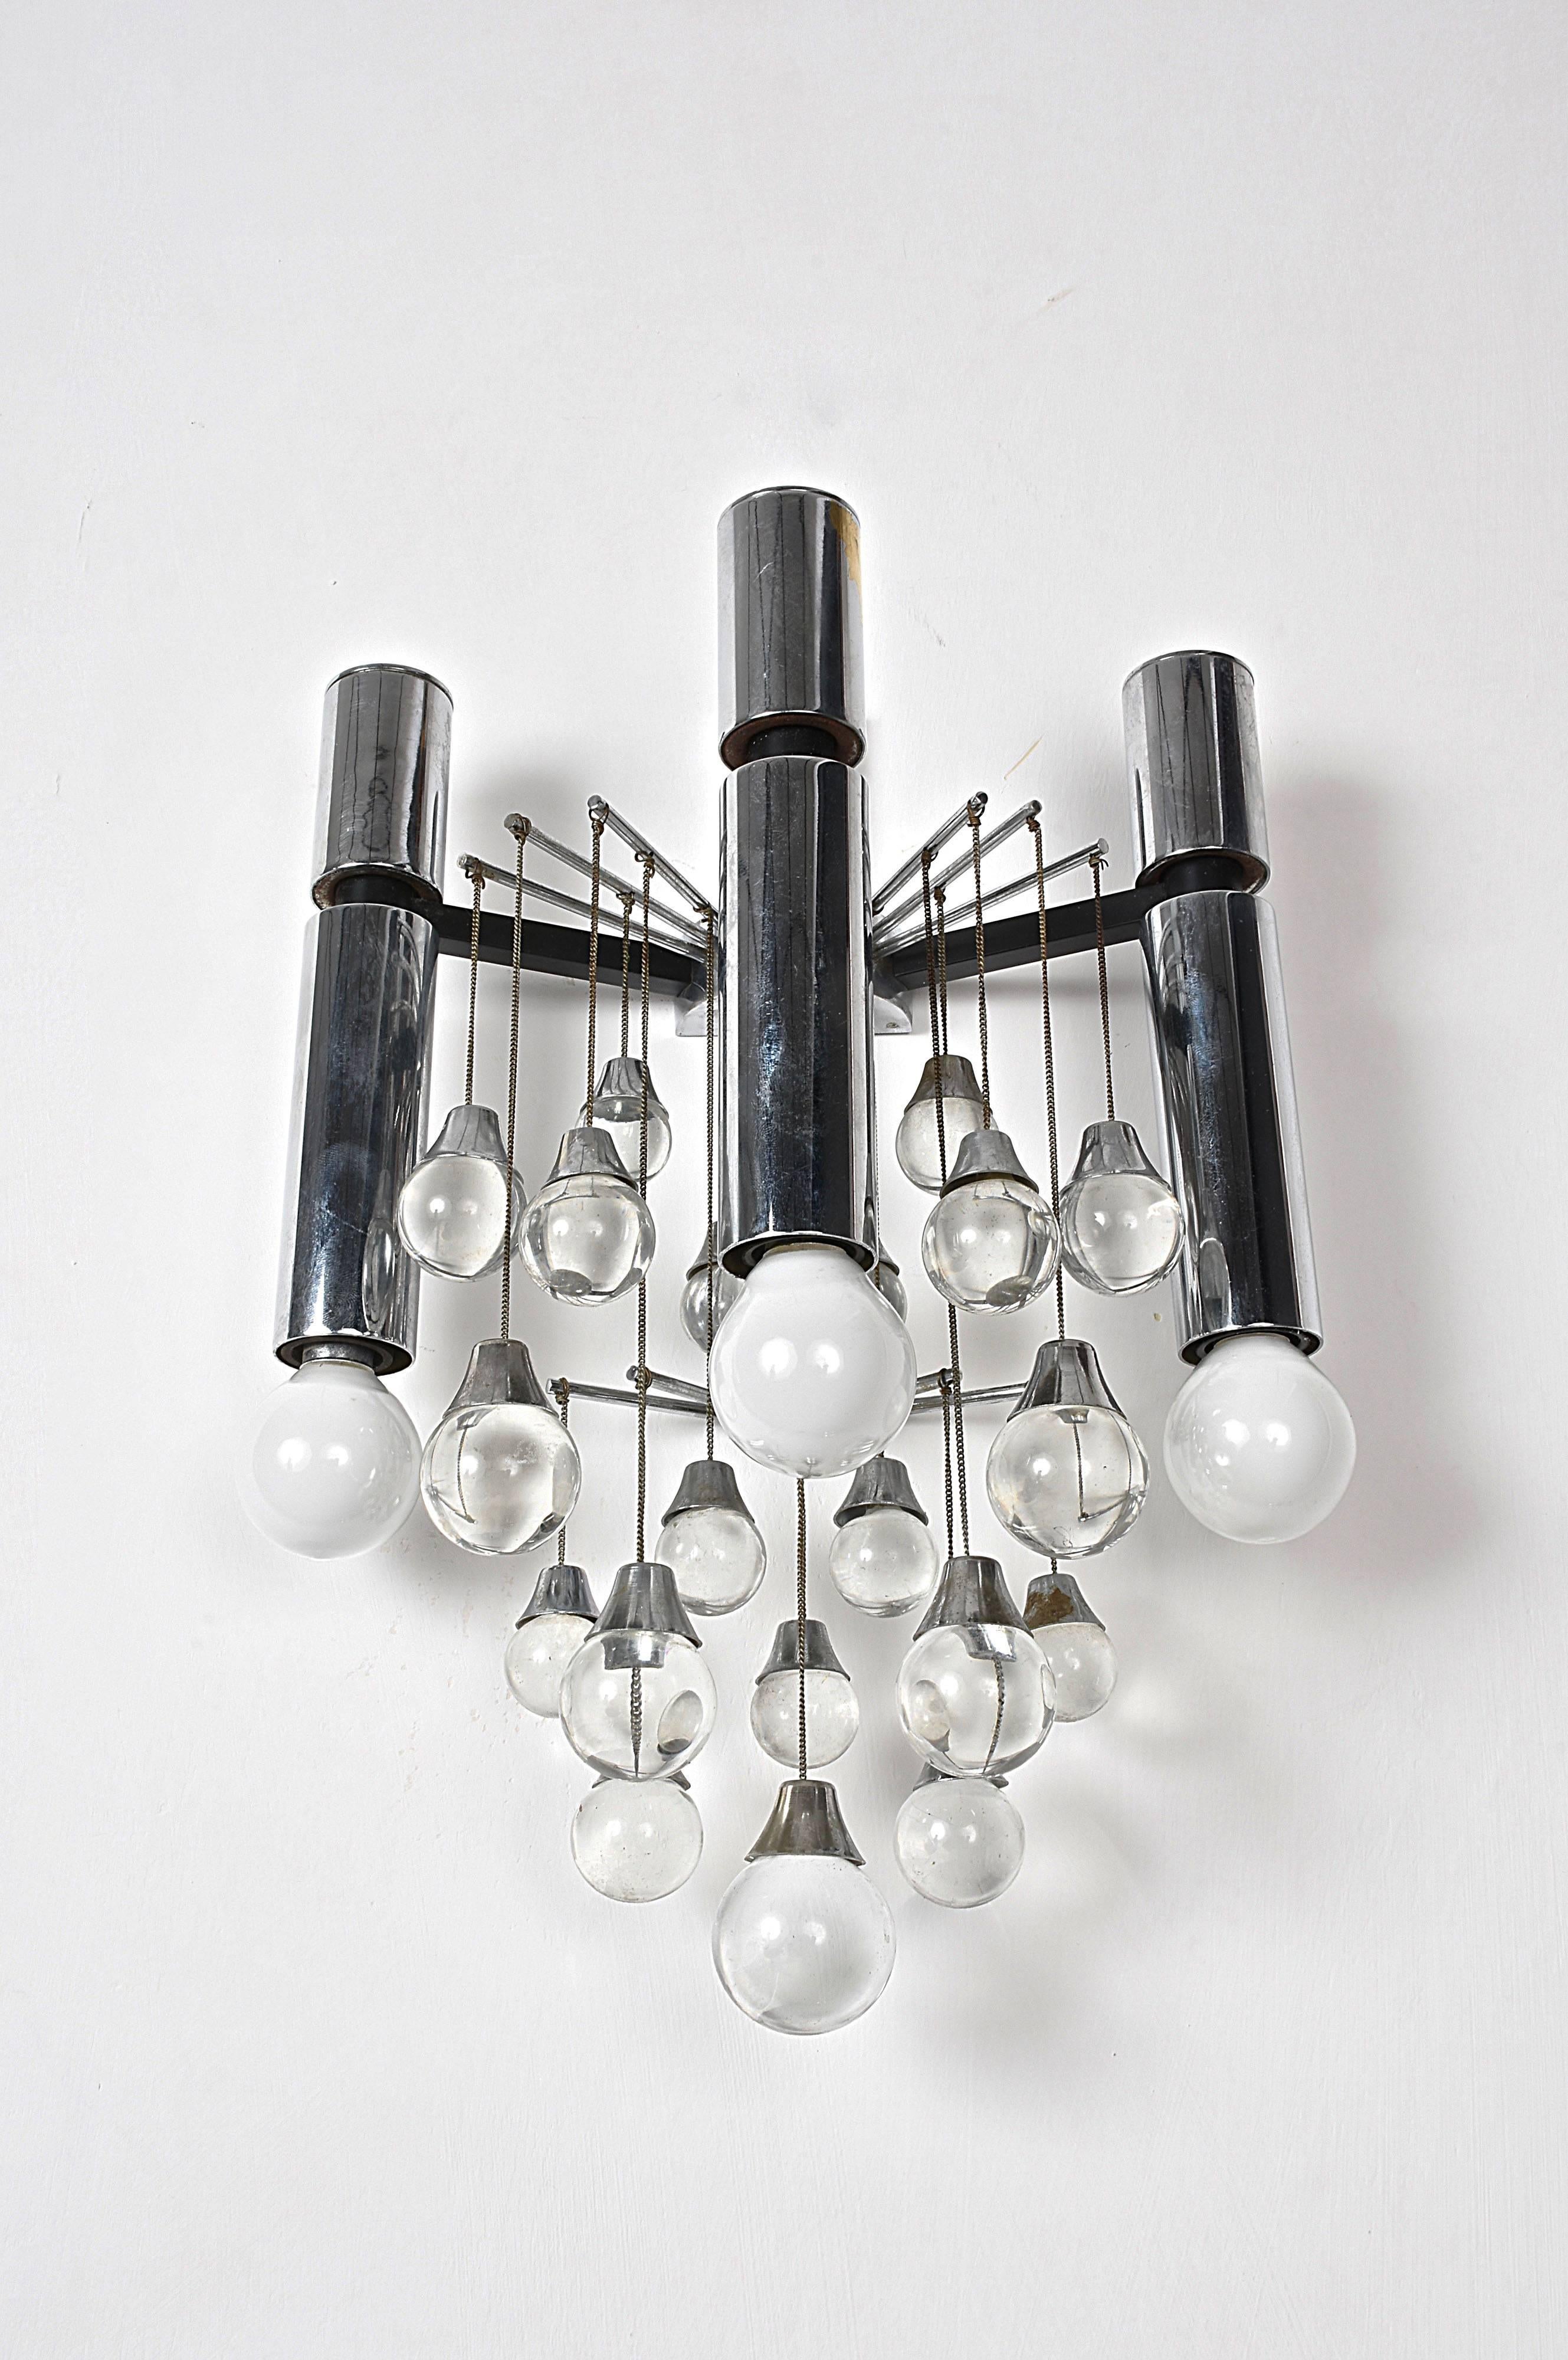 Pair of Sciolari Chrome and Glass Italian Sconces with Three Lights, 1960s In Good Condition For Sale In Roma, IT